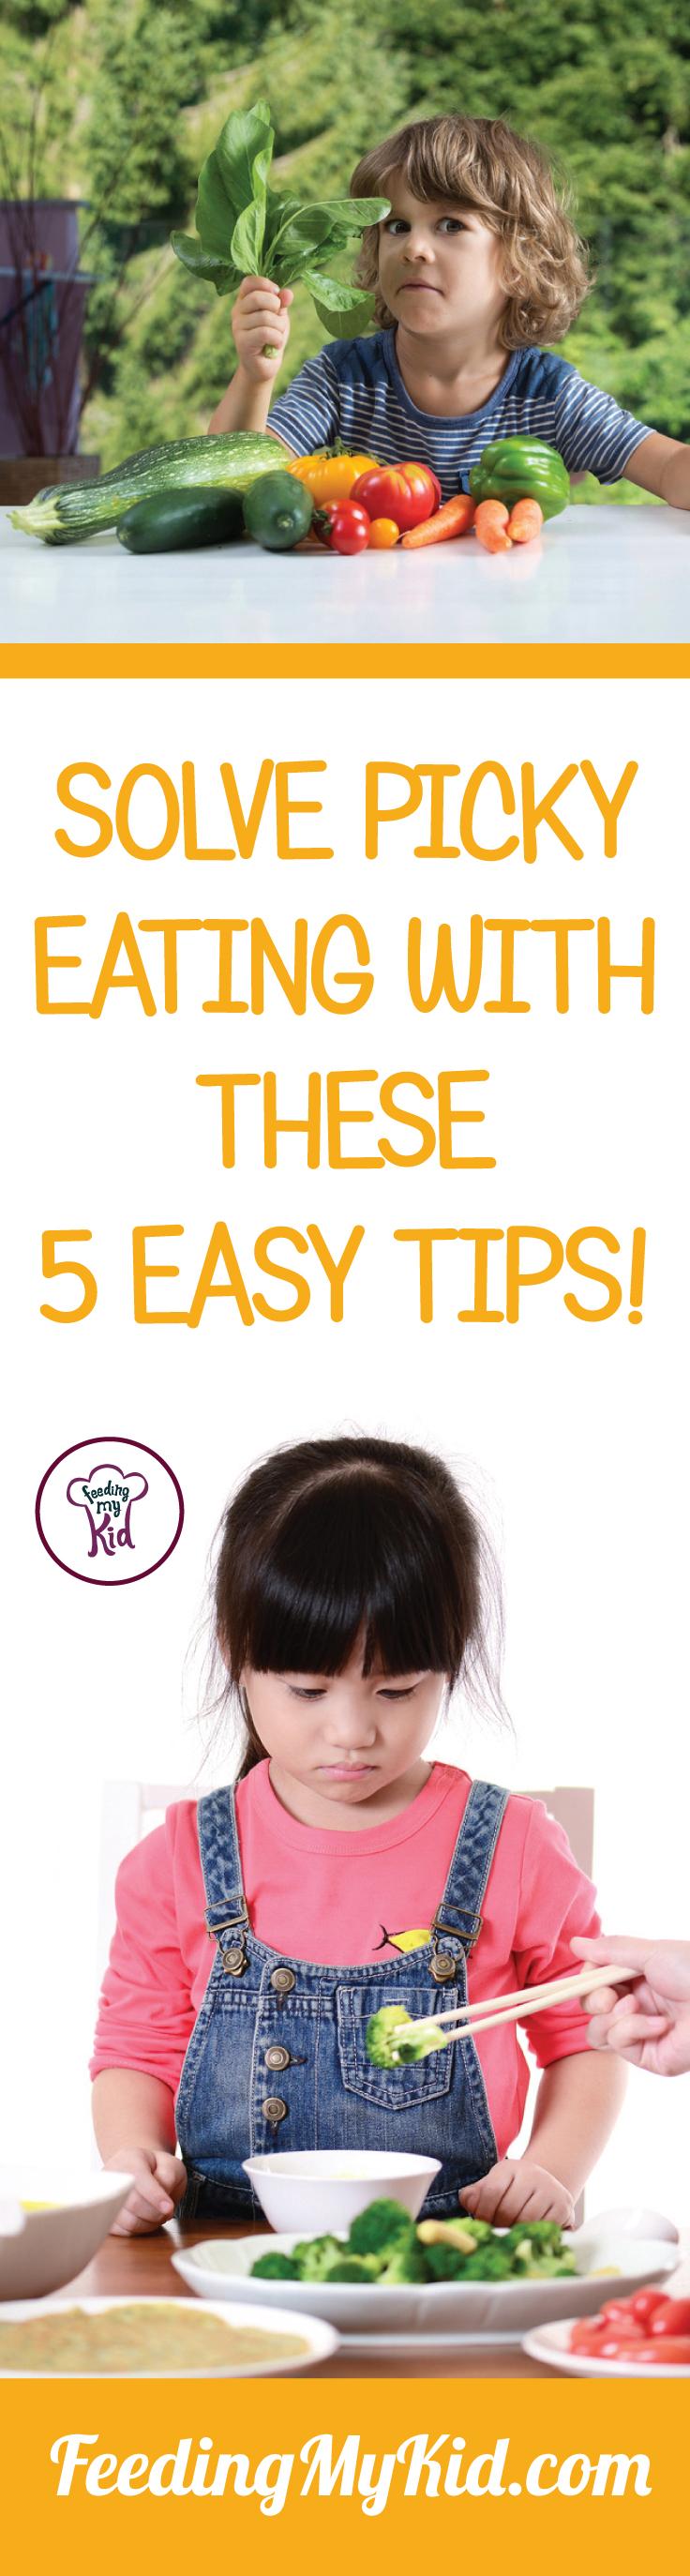 Solve Picky Eating With These 5 Easy Tips!